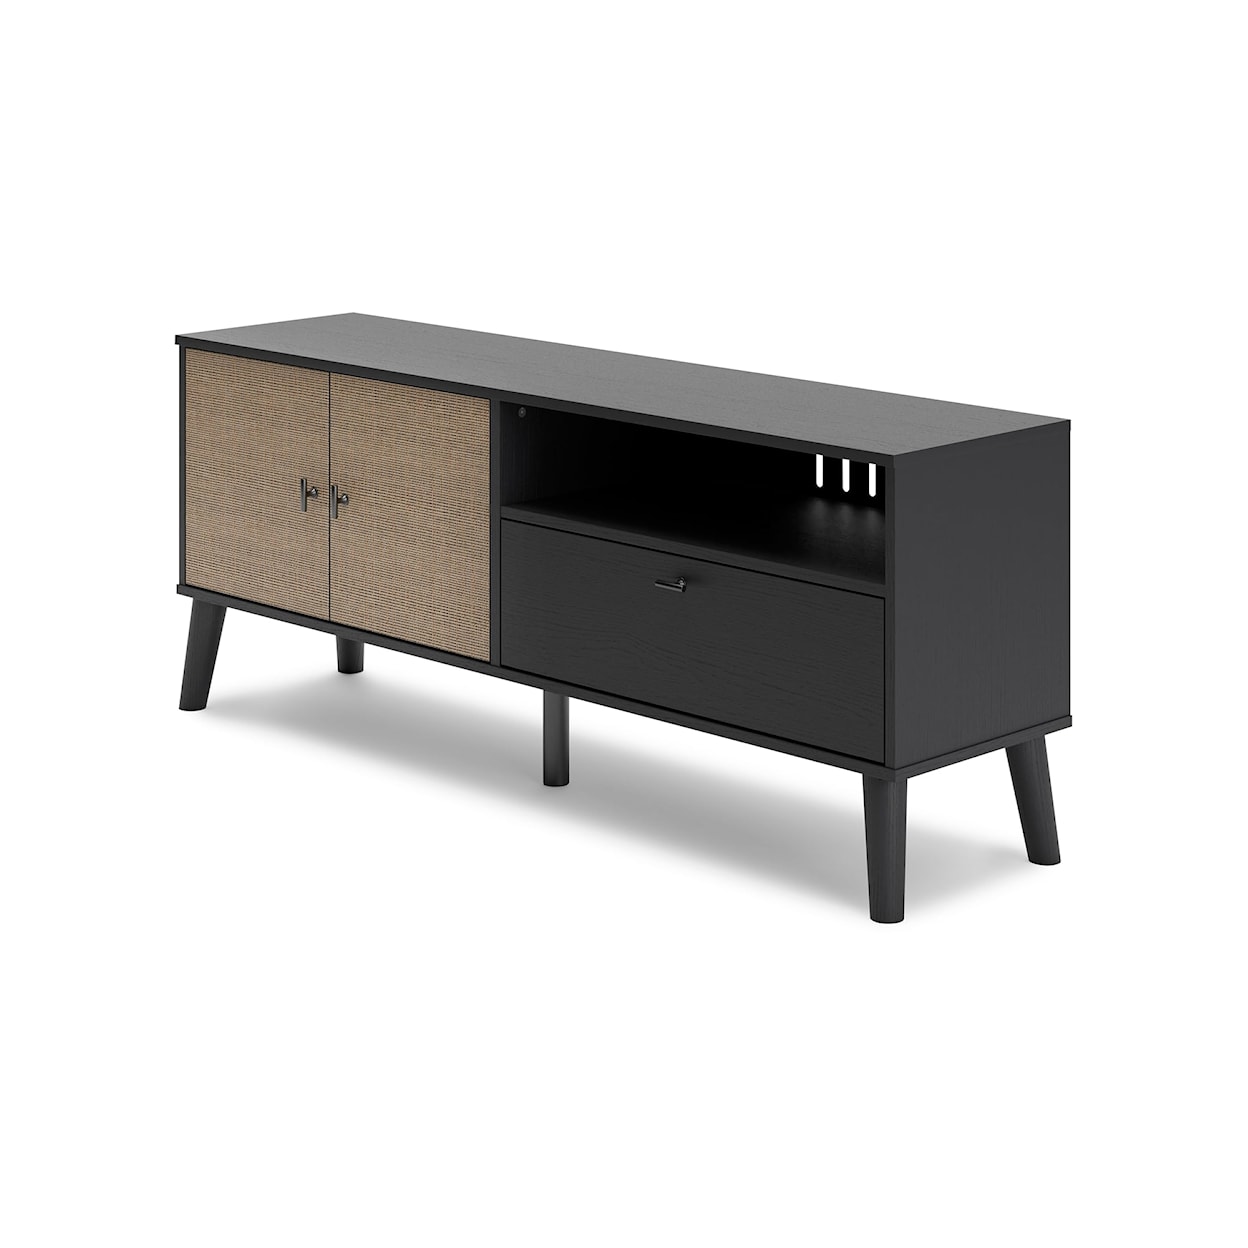 Benchcraft Charlang TV Stand